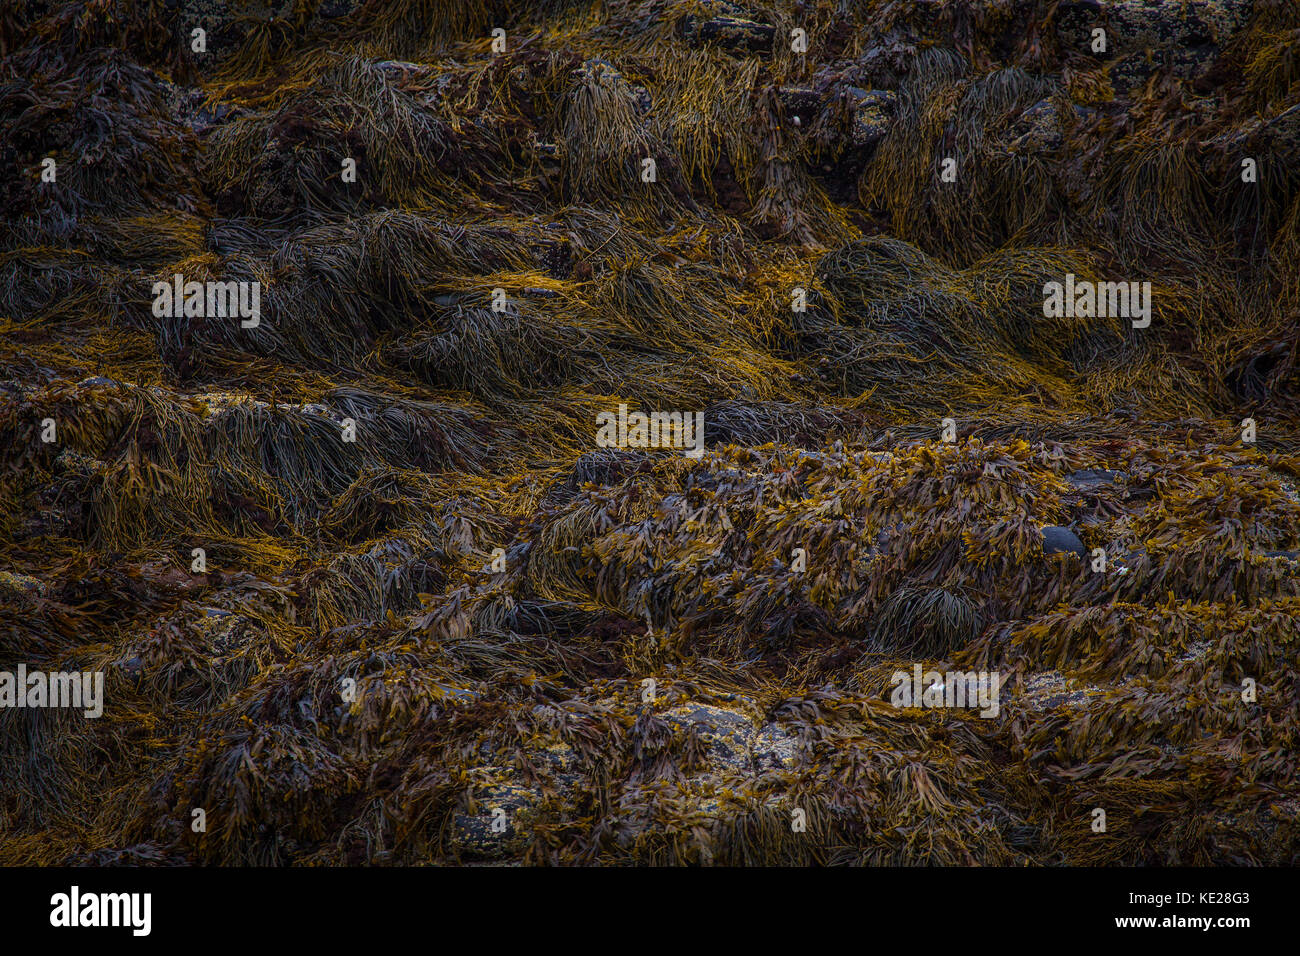 Backgrounds and backdrops - seaweed. Stock Photo